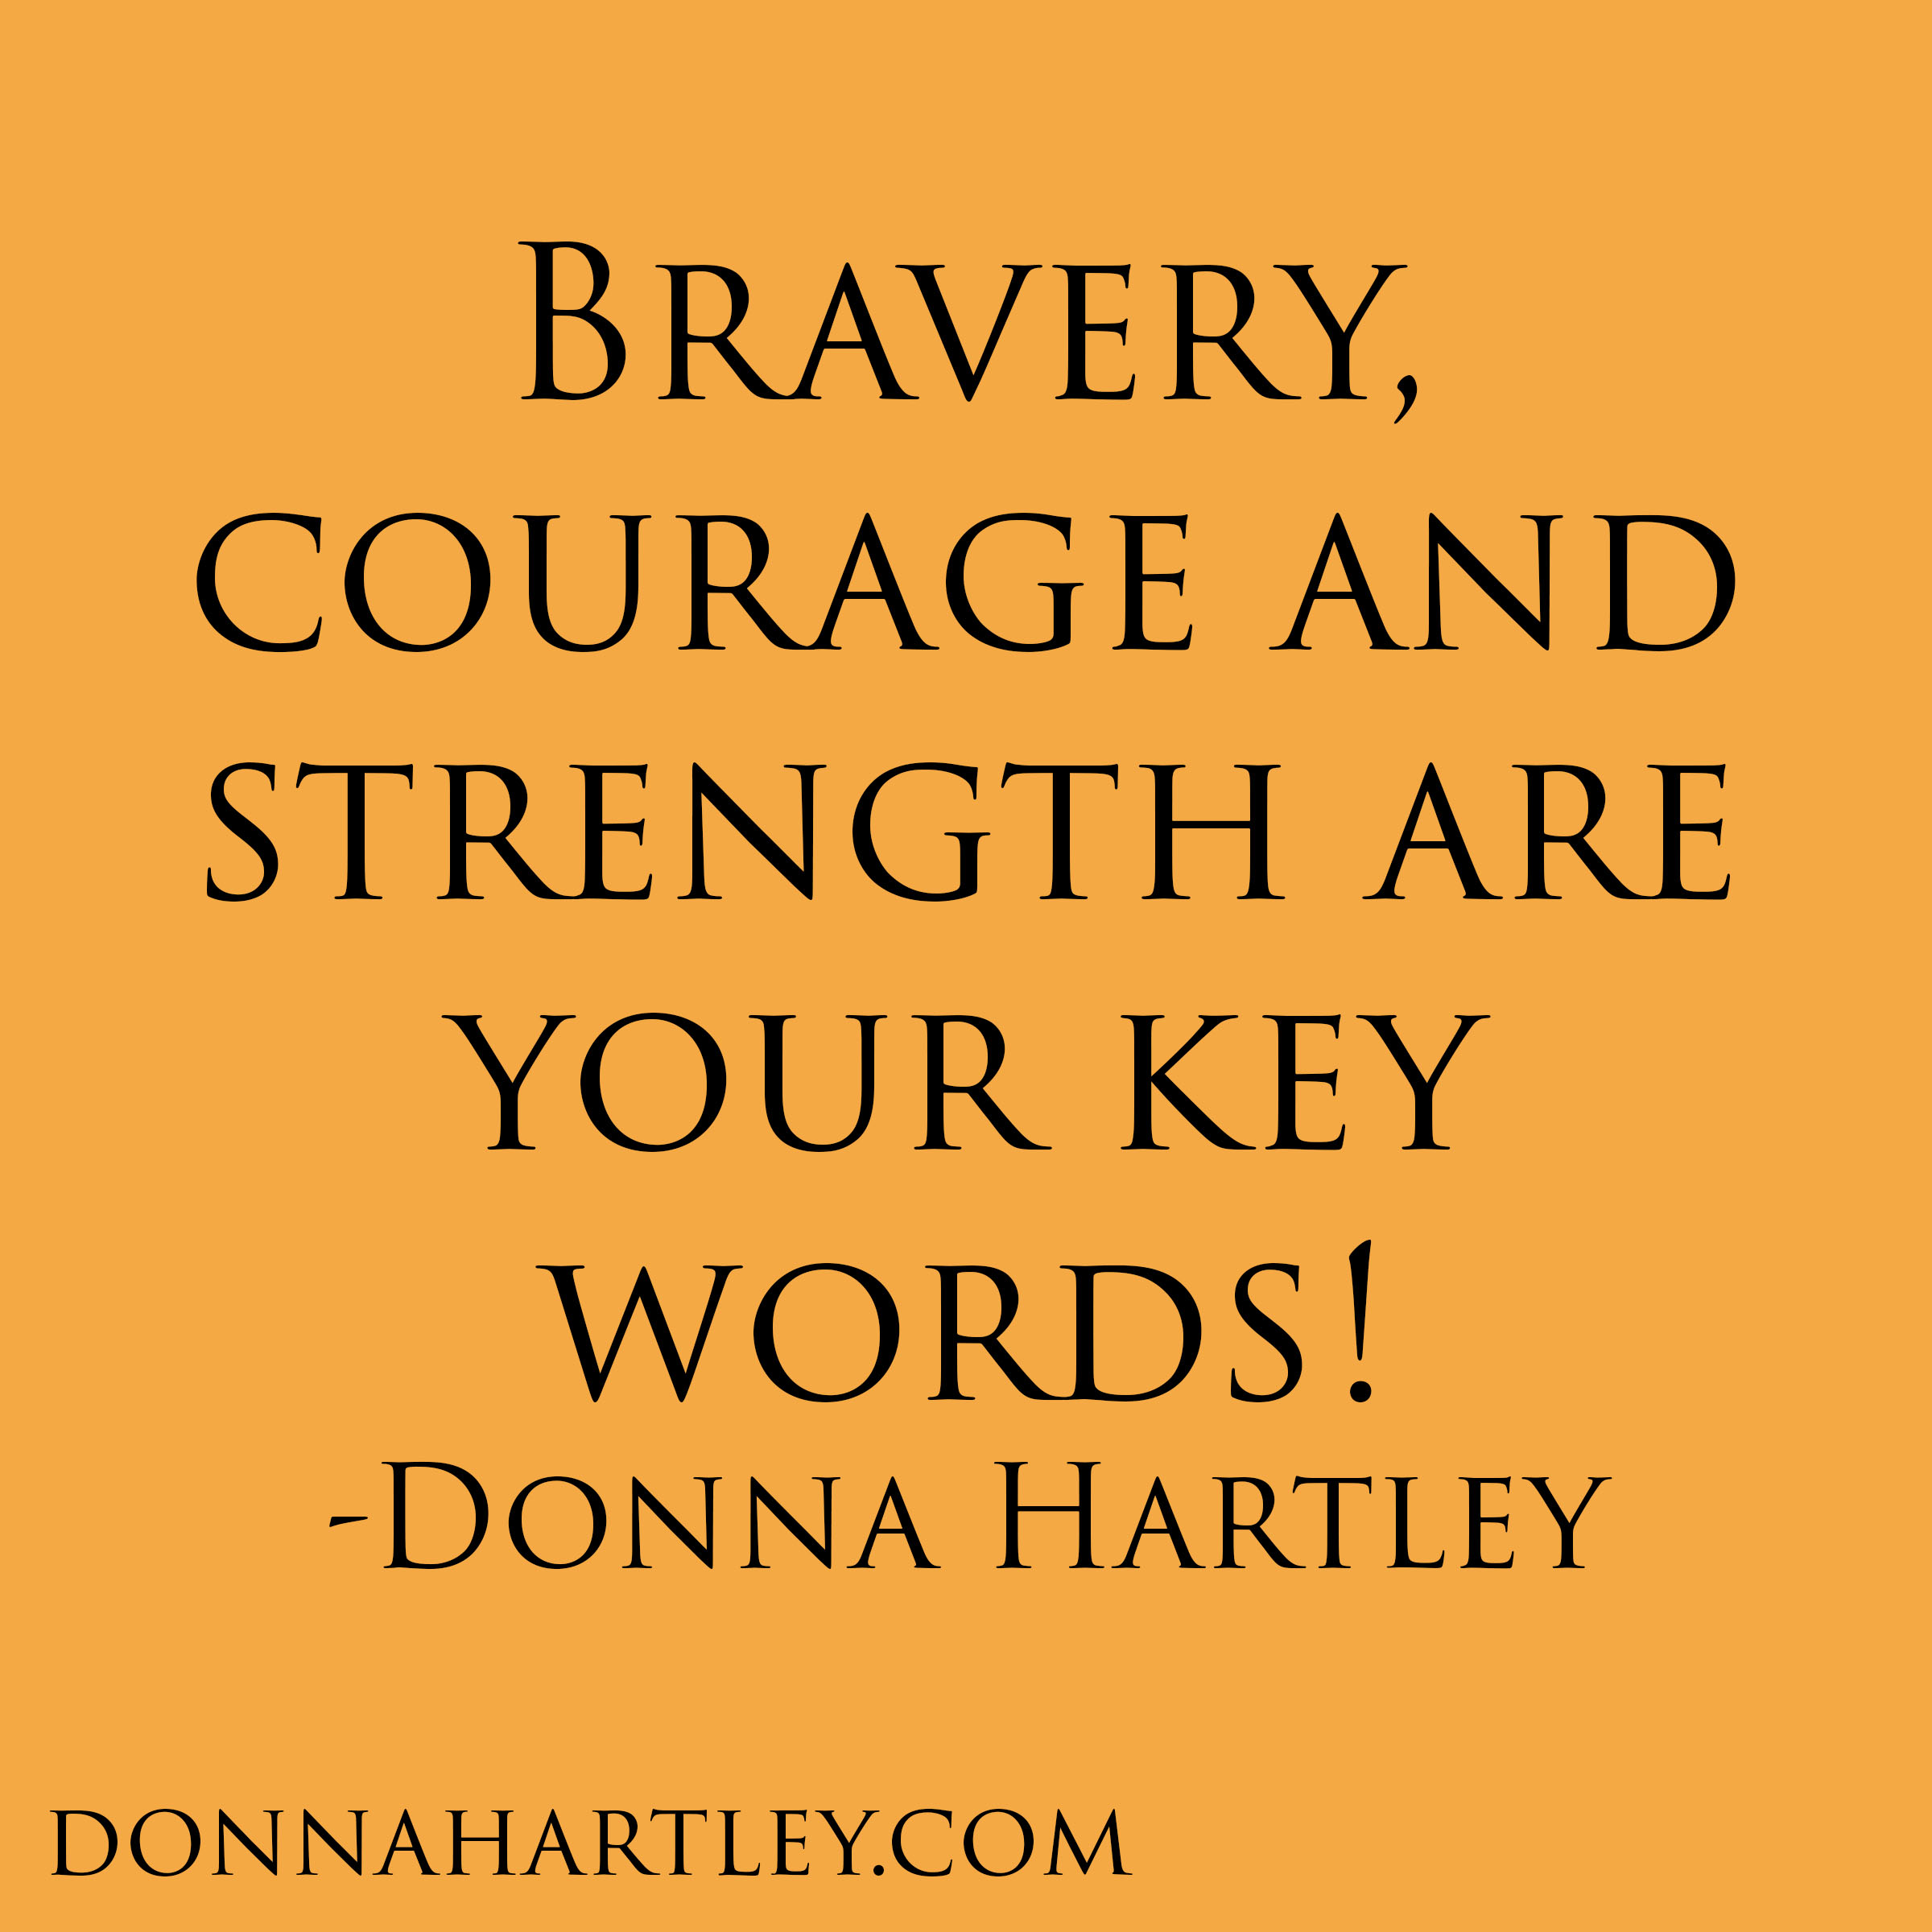 brave meaning vs courage